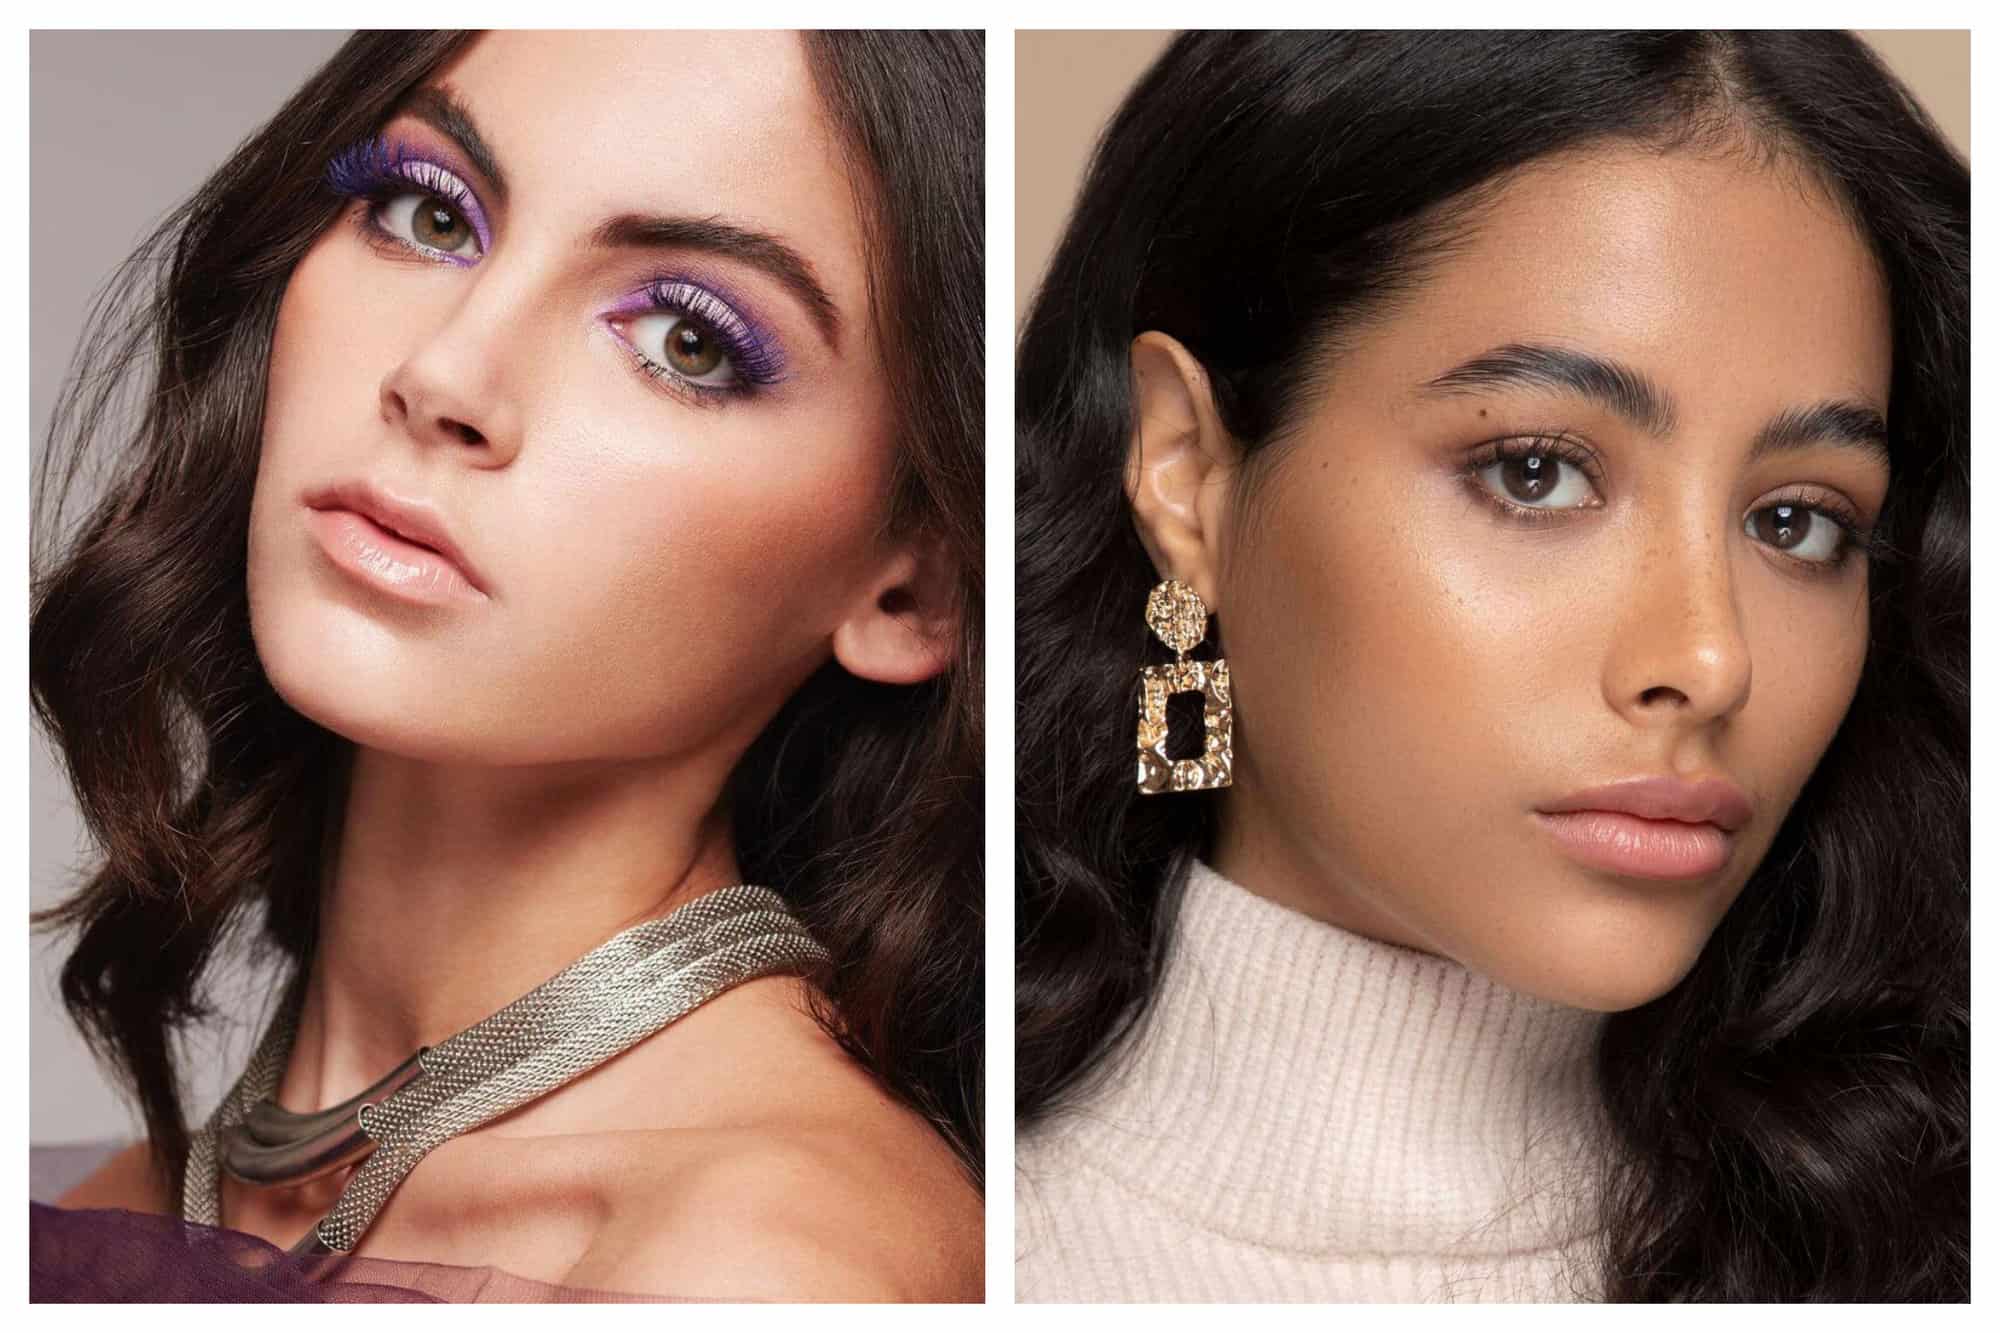 Both photos are beauty portrait shots. Left: A model is seen wearing purple eyeshadow with falsies clipped on. Her face is well contoured and she has a nude lipstick on. She appears to wear a magenta-purple type of laced top with a thick silver necklace. Right: A model is seen sporting the "au naturel" make up look that parisians are famous for. She has nude eyeshadow and lipstick. Her cheek blush is neutral too. Her eyelashes are swept with a bit of mascara.